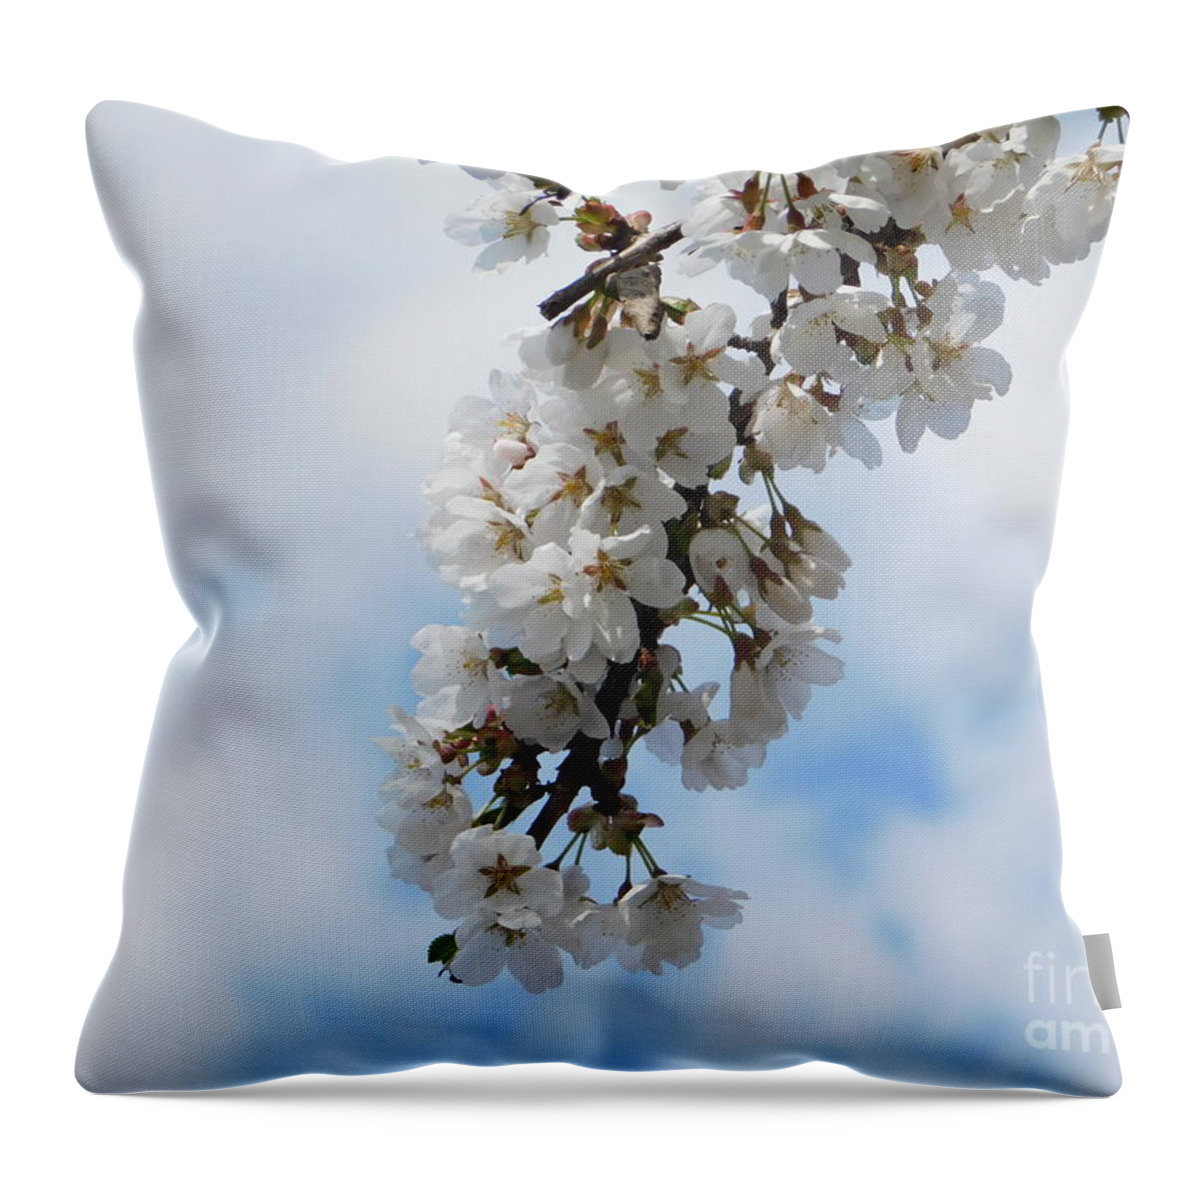 Cherry Blossoms Throw Pillow featuring the photograph Come Nuvole by Stefania Caracciolo